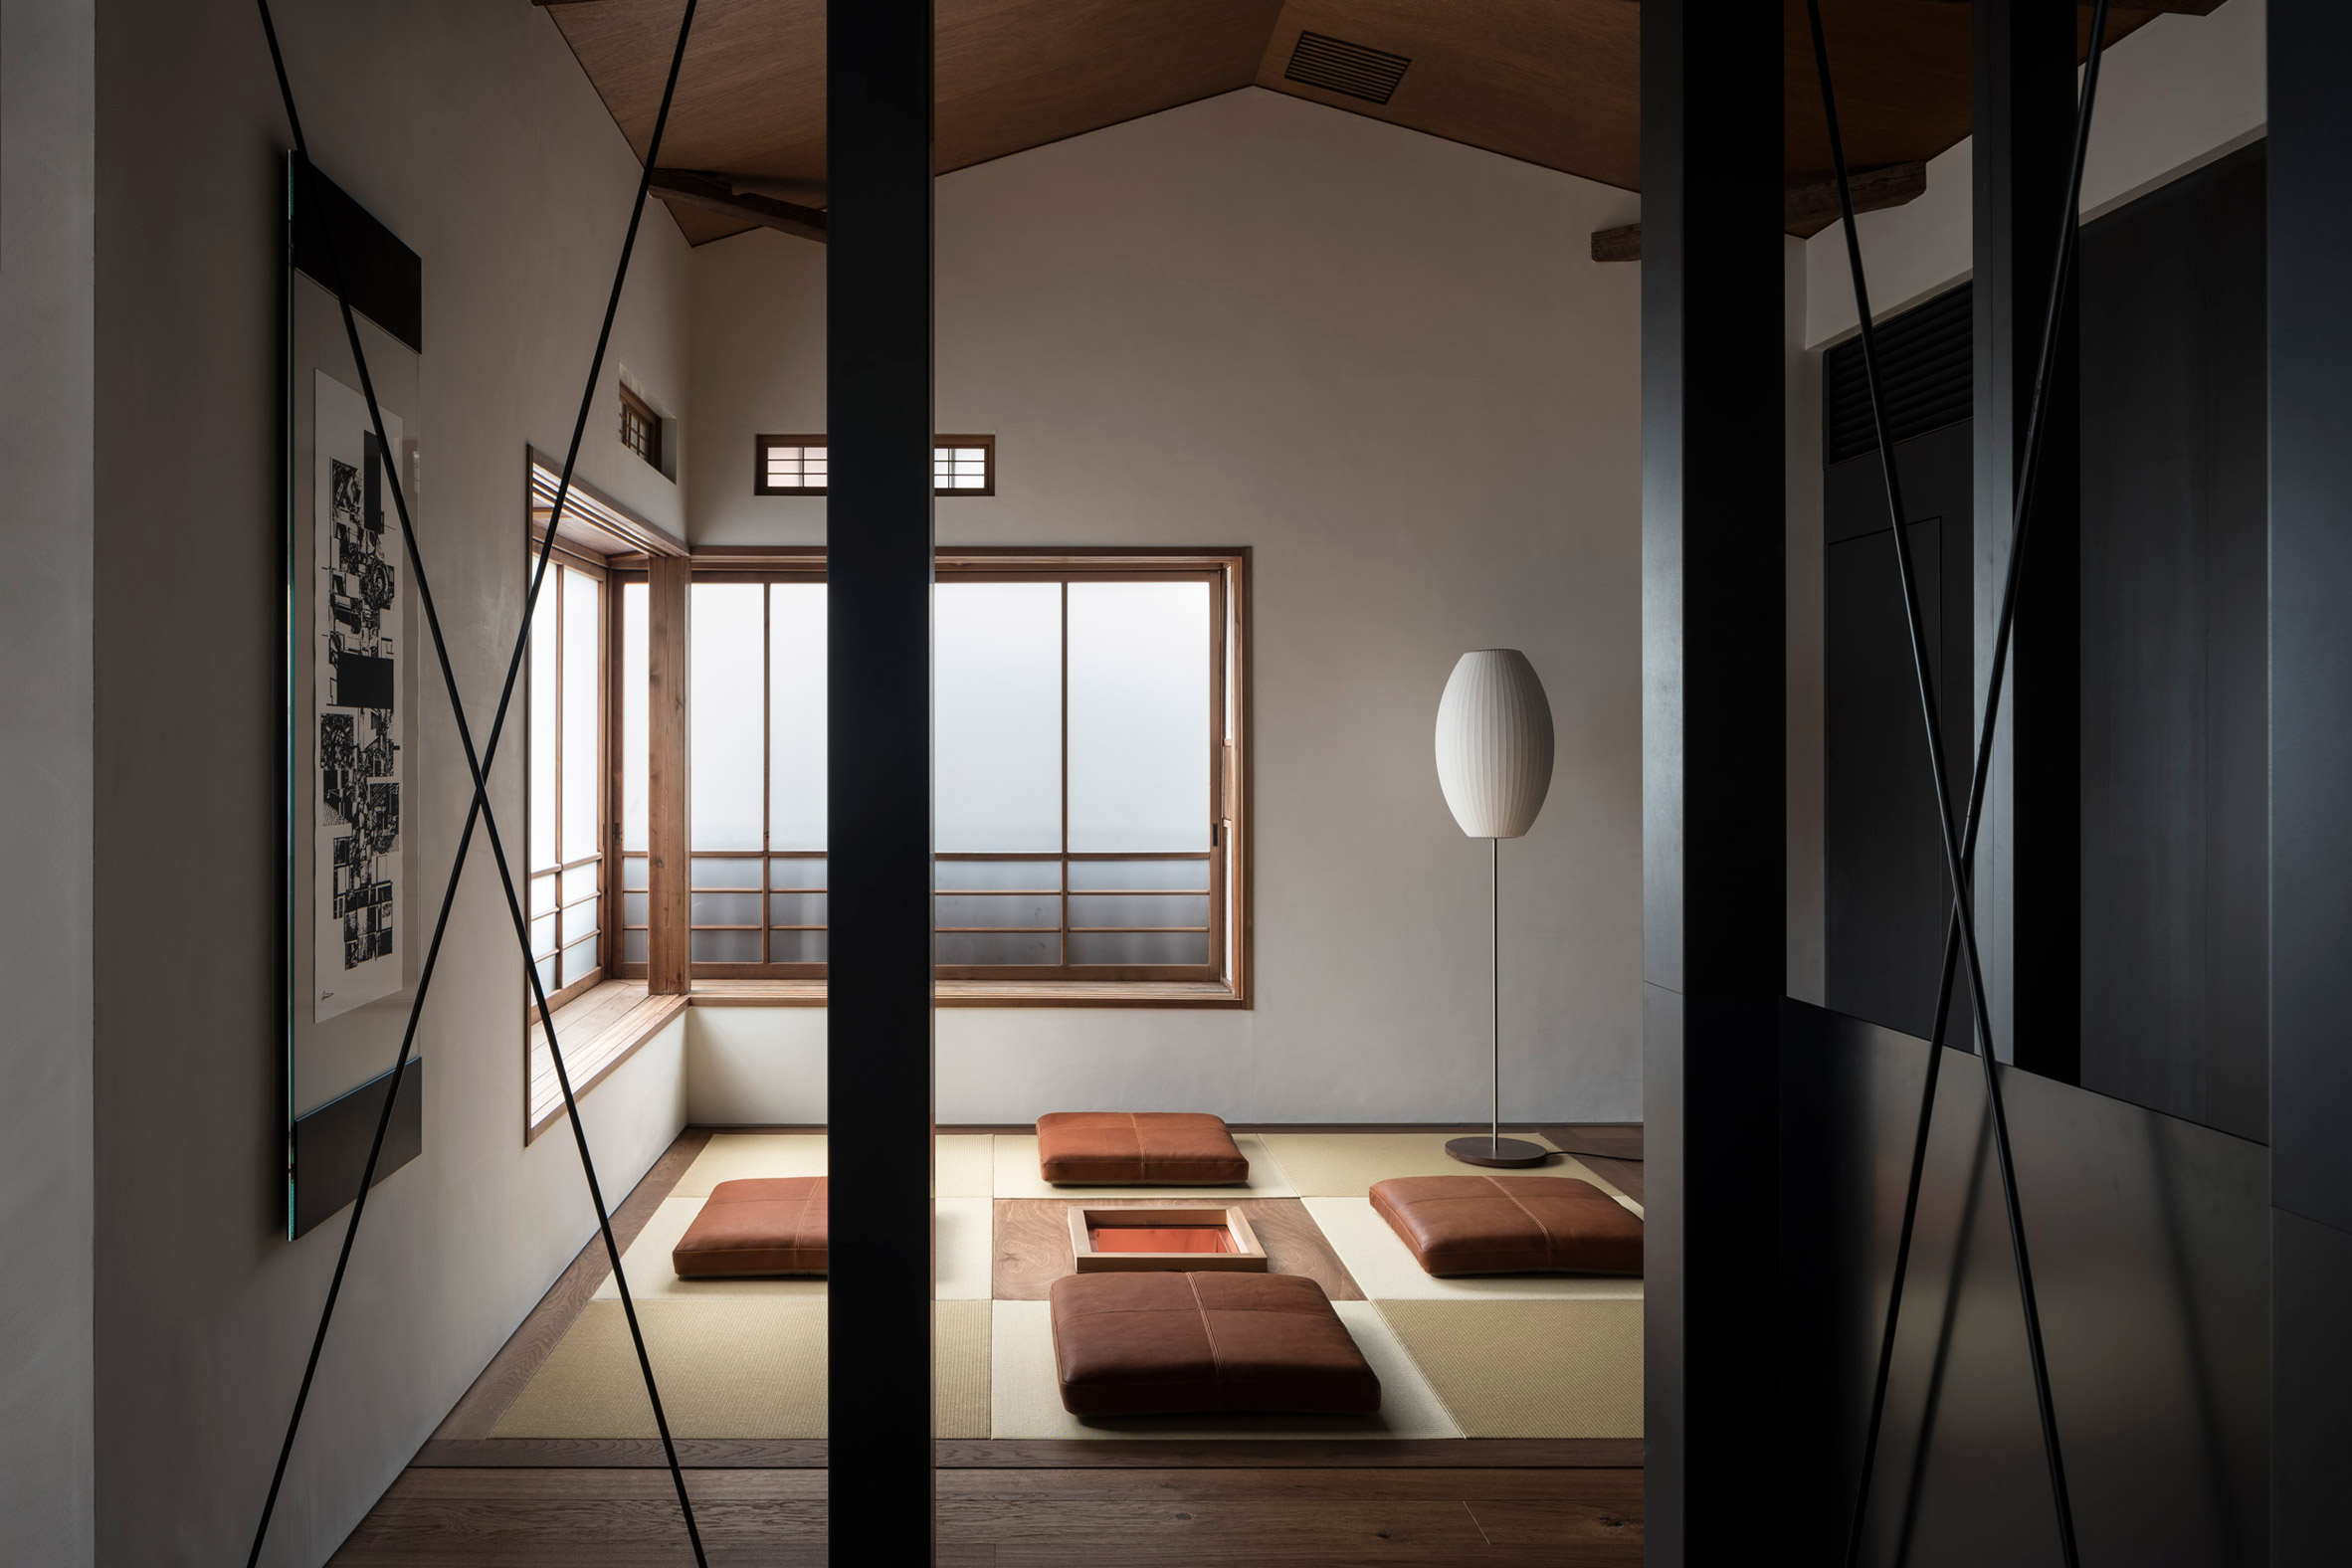 Trunk House designed by Trunk Atelier and Tripster